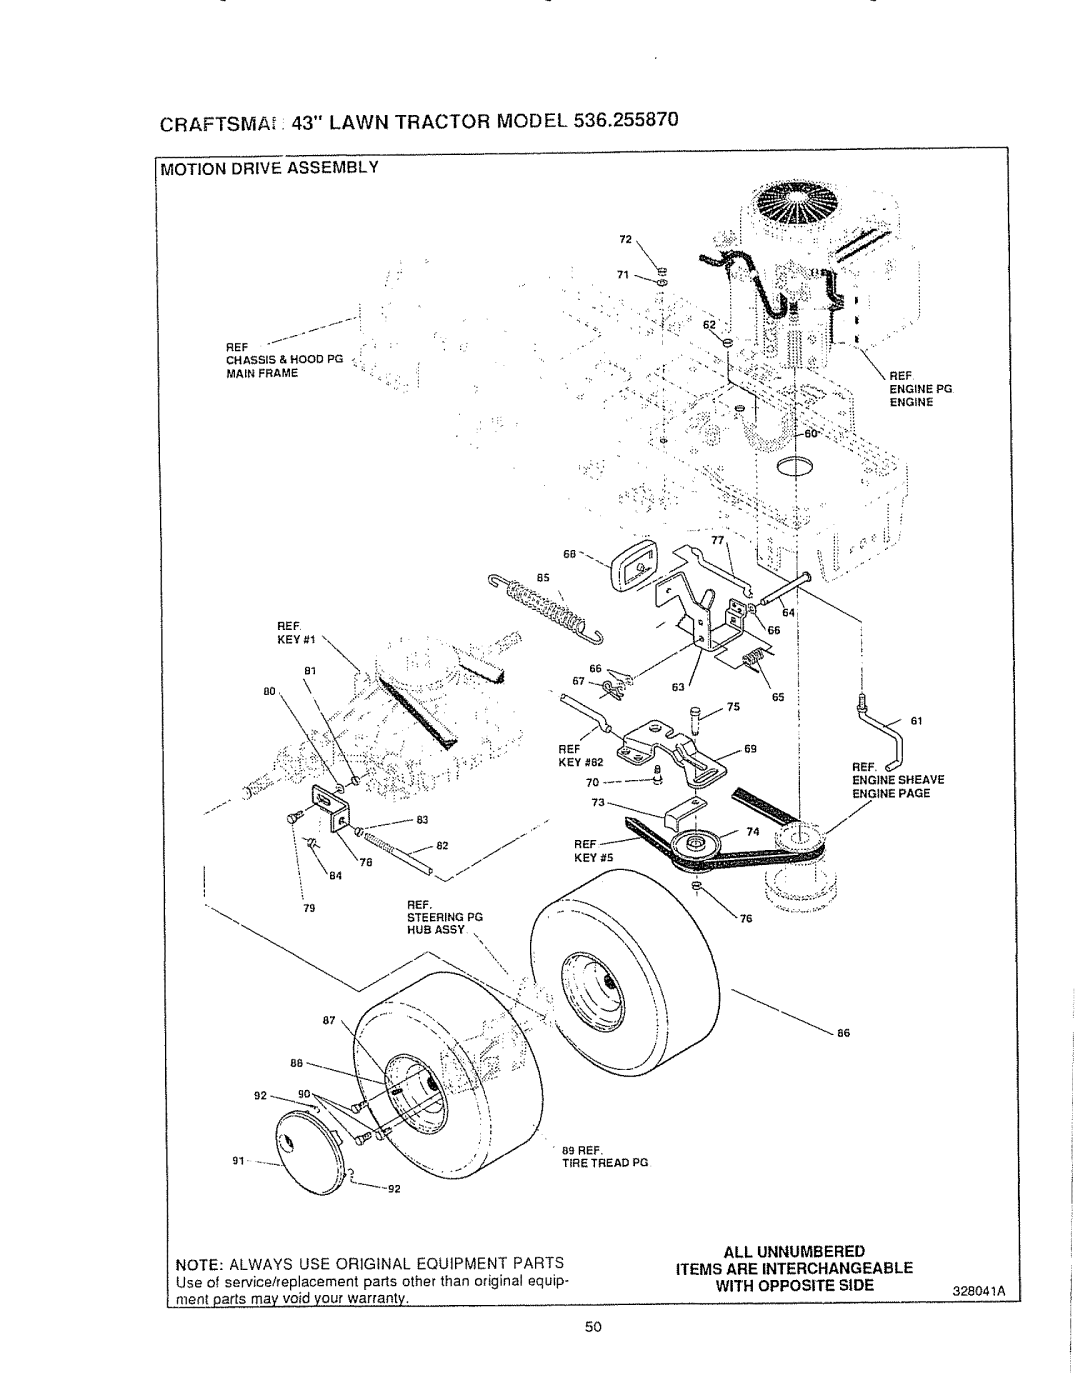 Sears 536.25587 CRAFTSMA_ : 43 LAWN TRACTOR MODEL, Motion Drive Assembly, All Unnumbered, With Opposite Side, Chassis 